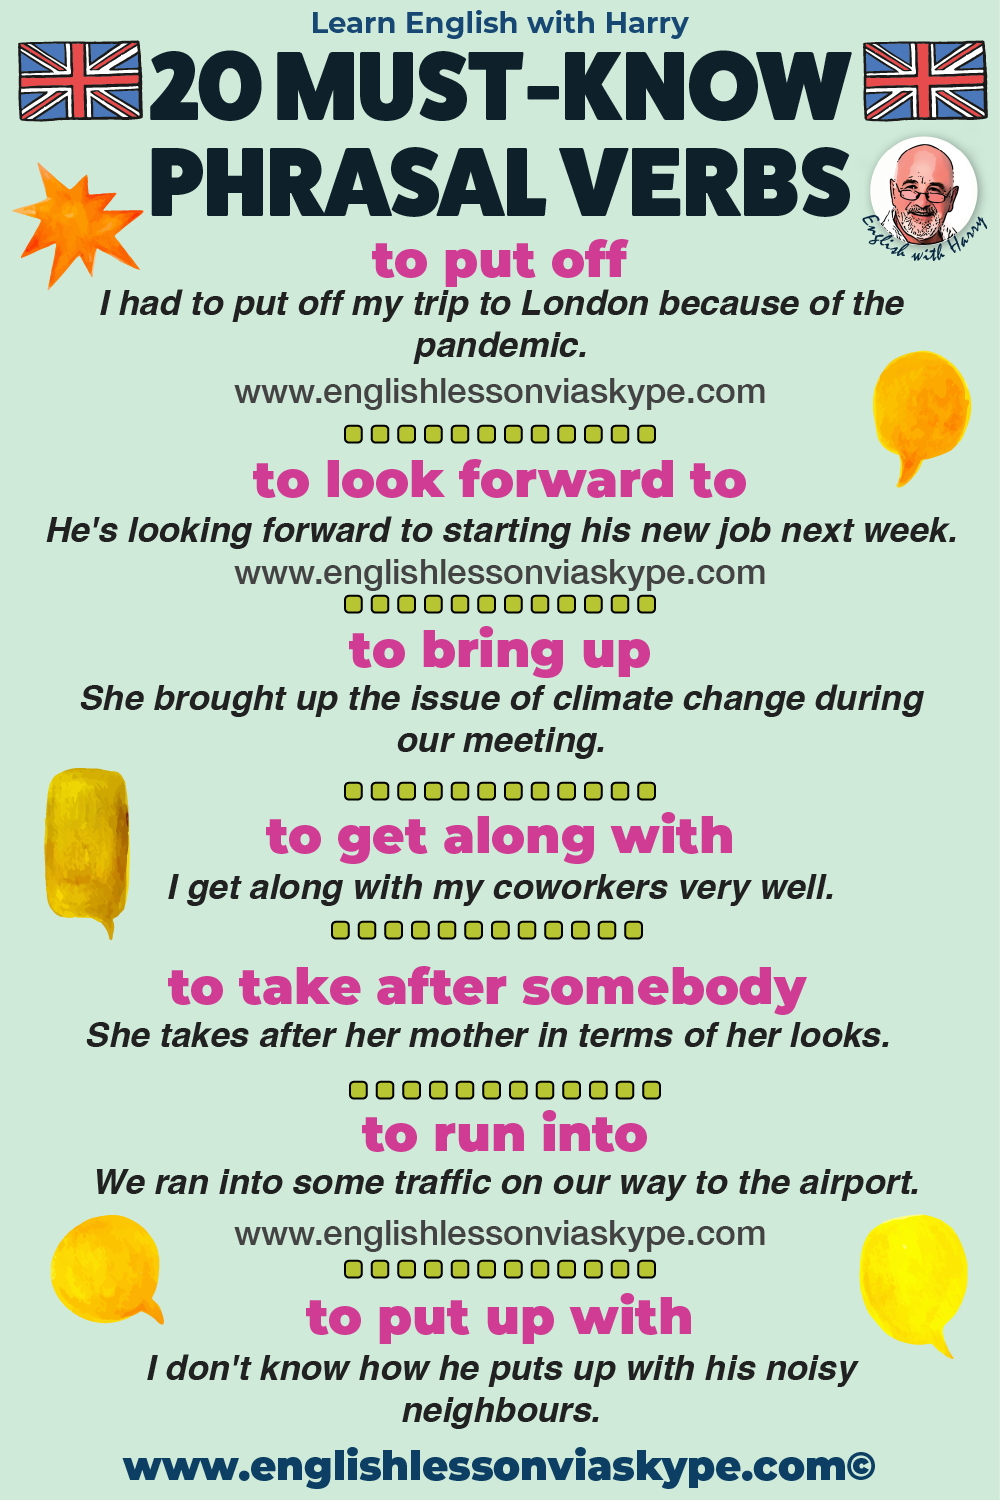 Phrasal verbs for daily conversations. English speaking skills. Improve English speaking skills. Upgrade your vocabulary. English grammar rules. Improve English speaking. Advanced English lessons on Zoom and Skype. Improve English speaking and writing skills. #learnenglish